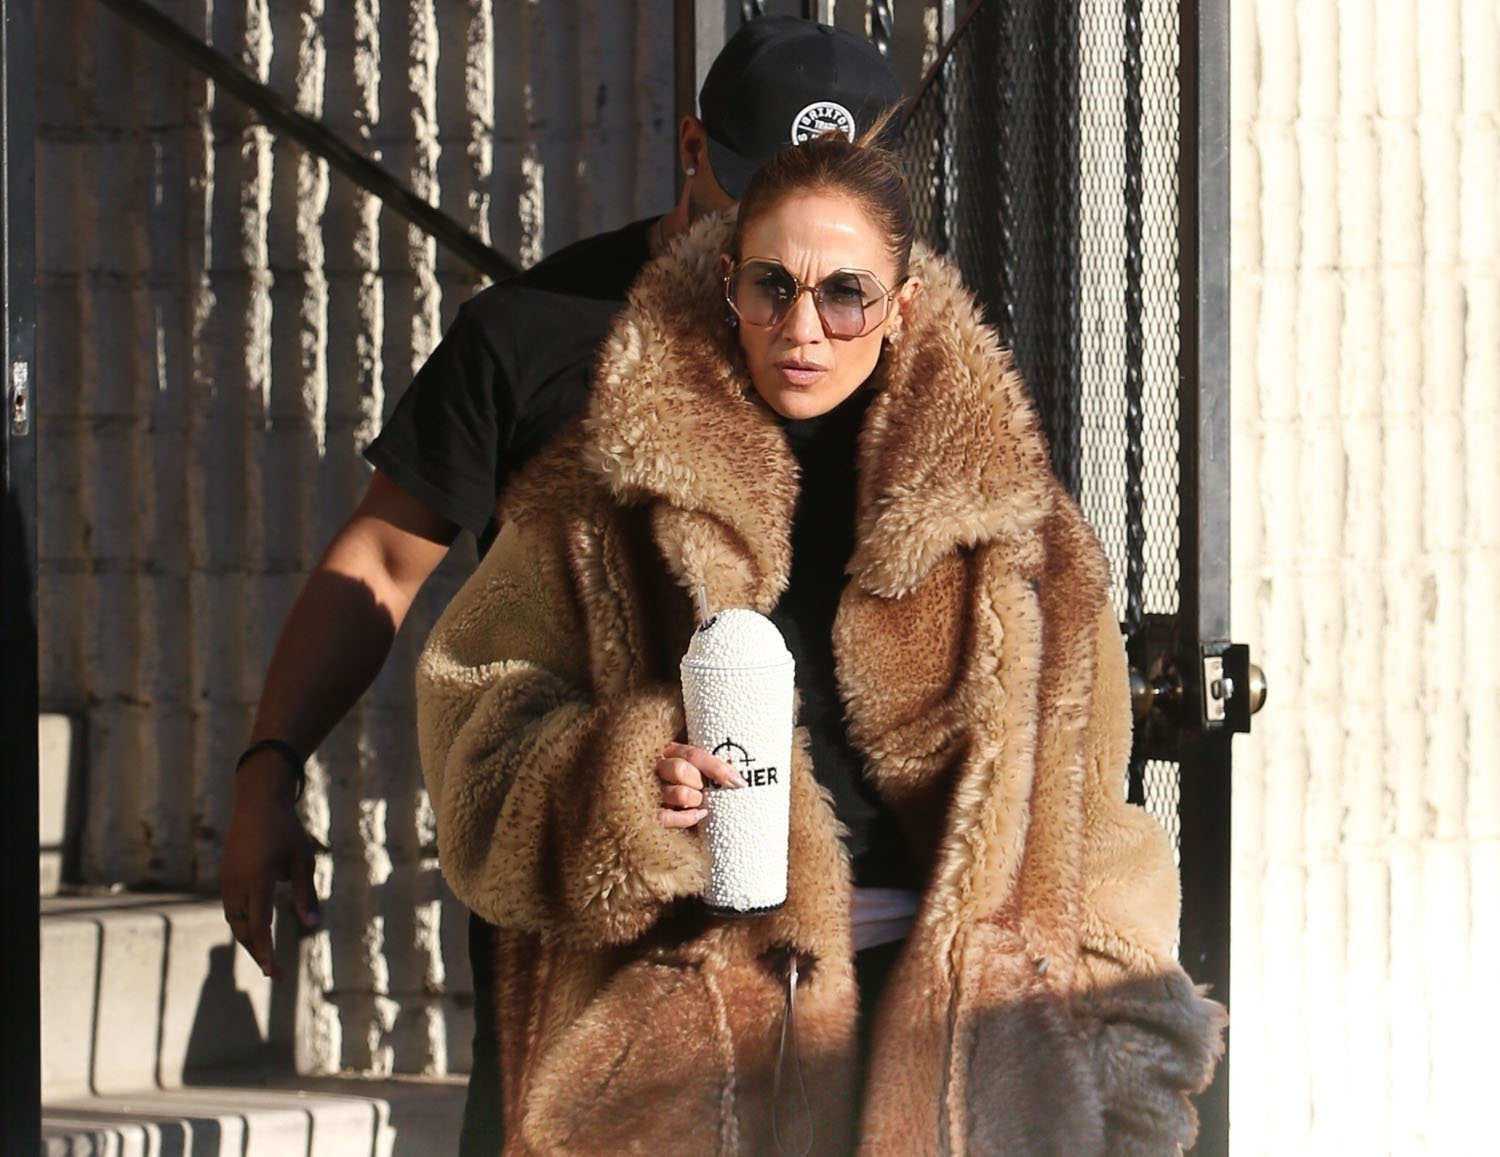 Could Jennifer Lopez's video with Ben Affleck posted to social media ...